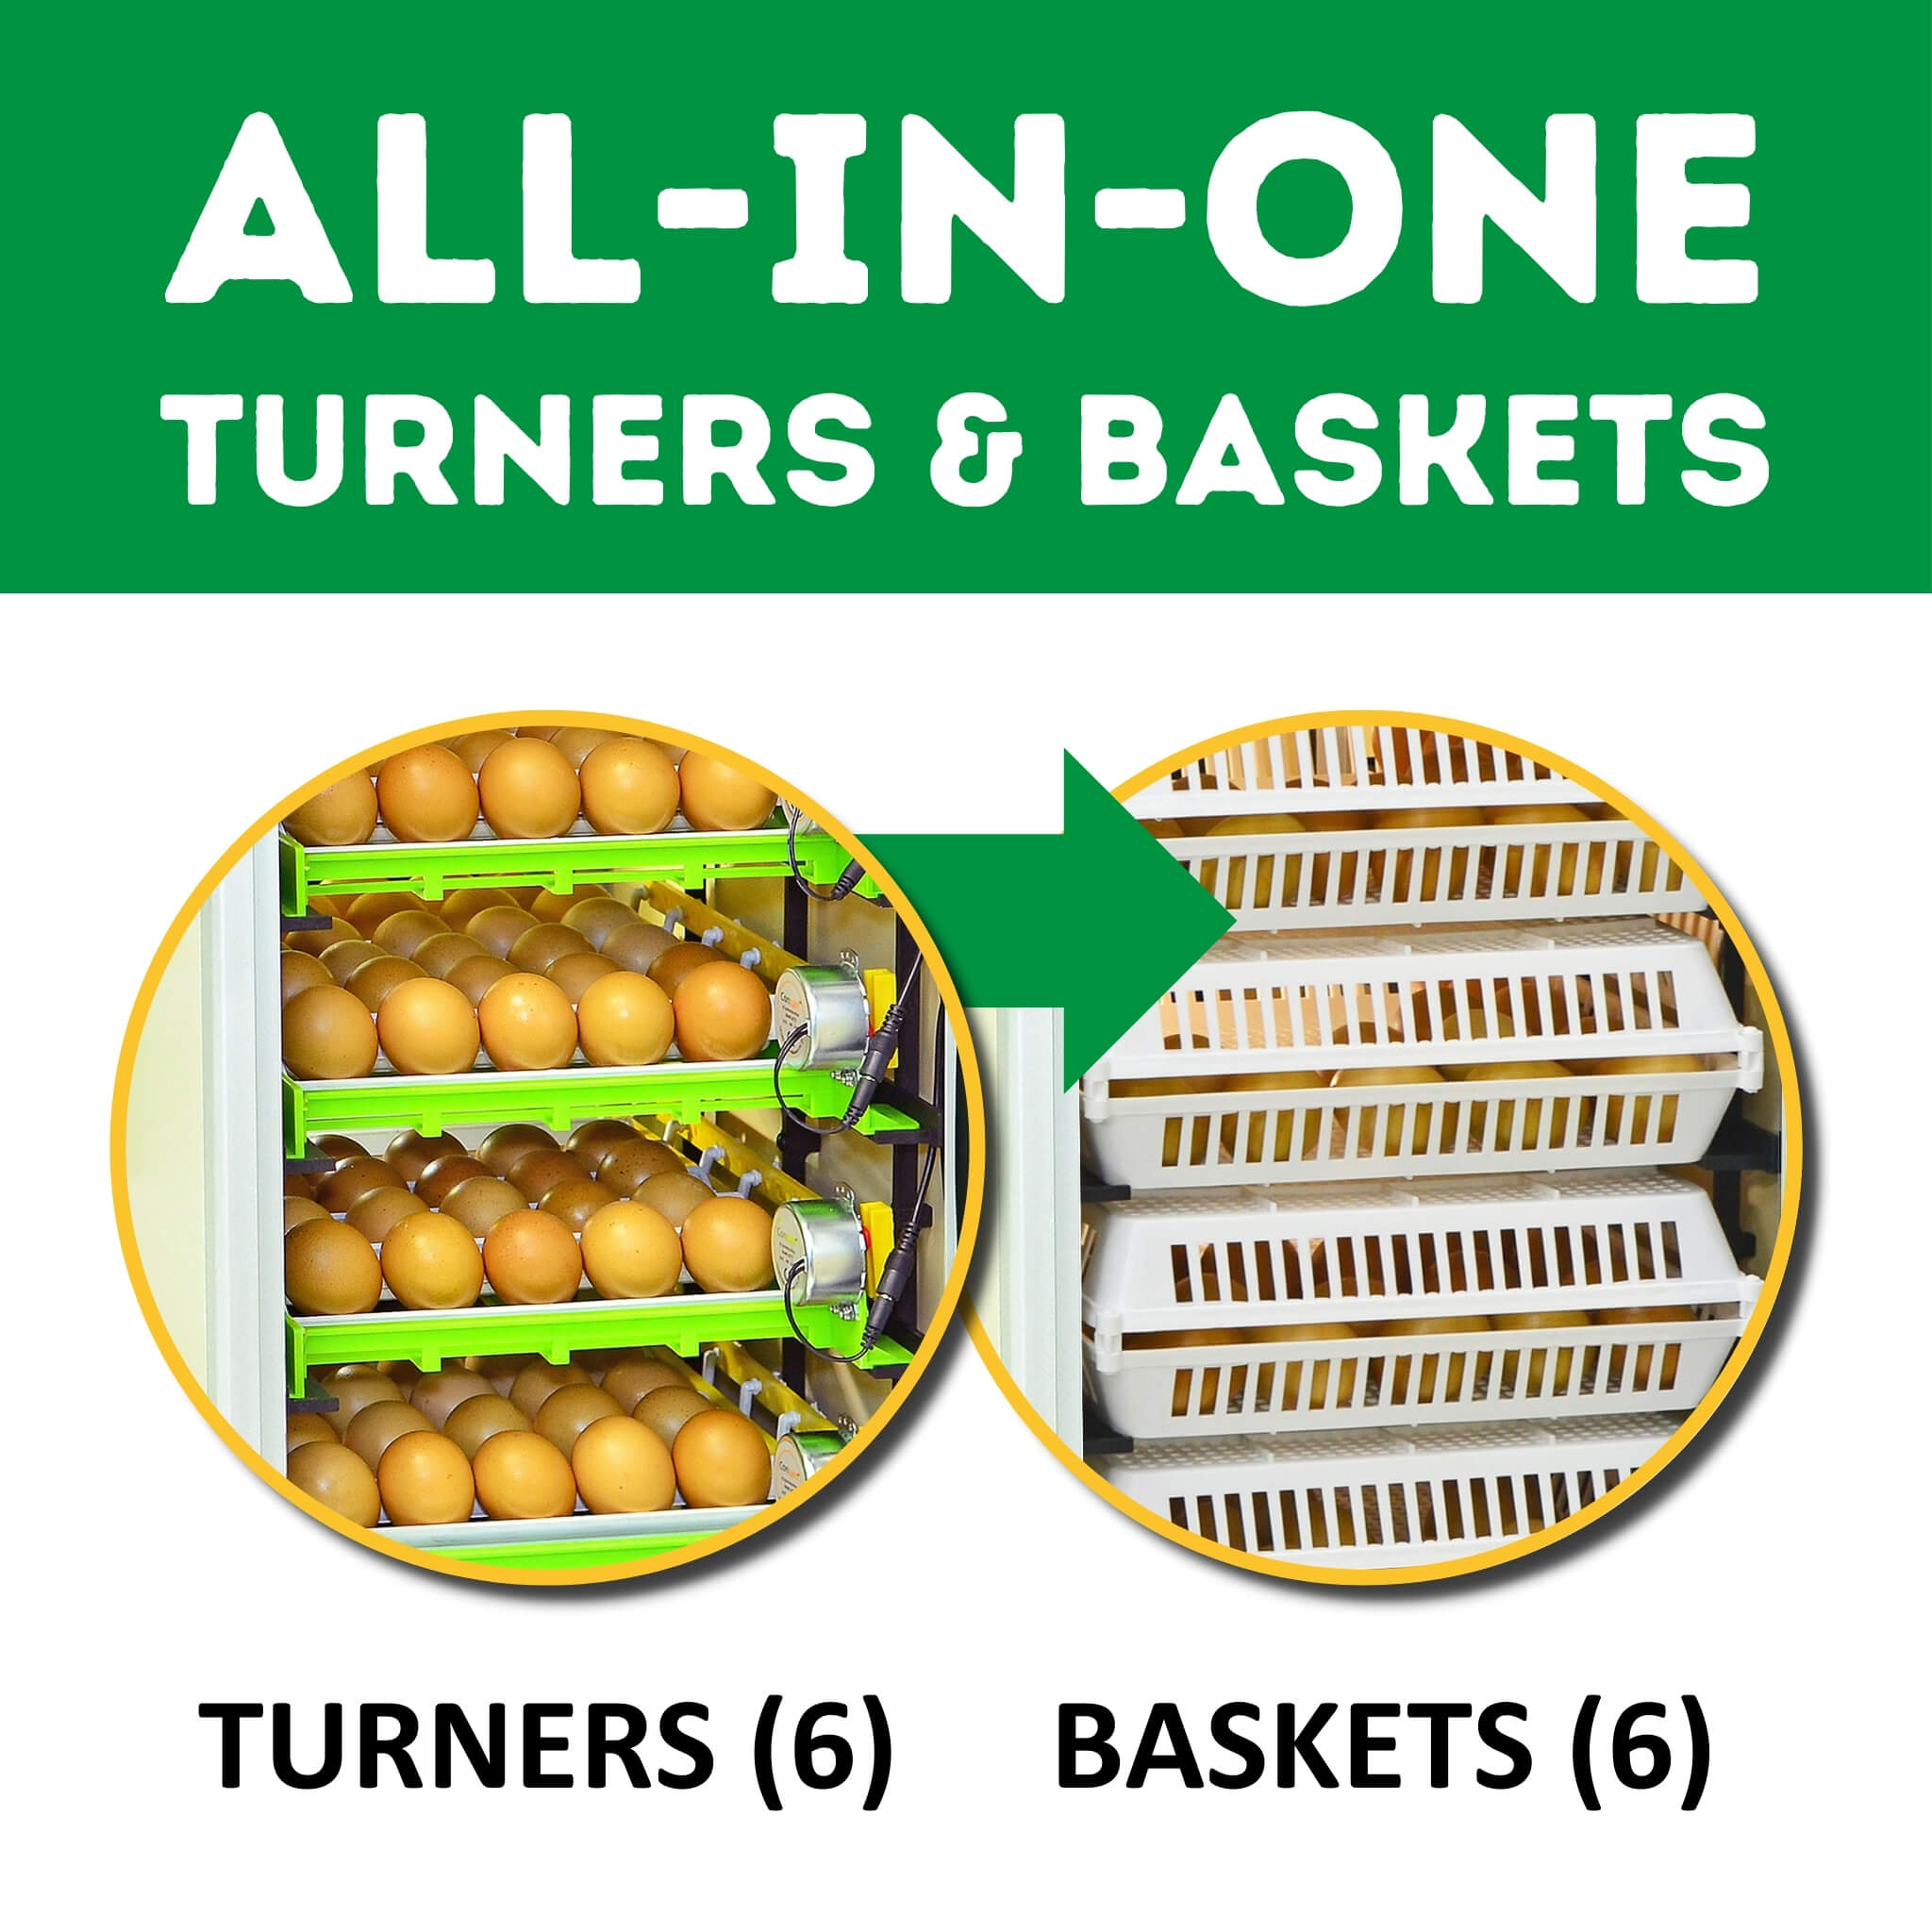 Hatching Time Cimuka CT180. Infographic showing the All-in-one turners and baskets for the CT180 egg incubator. Image shows that incubator can hold up to 6 turners and 6 baskets.